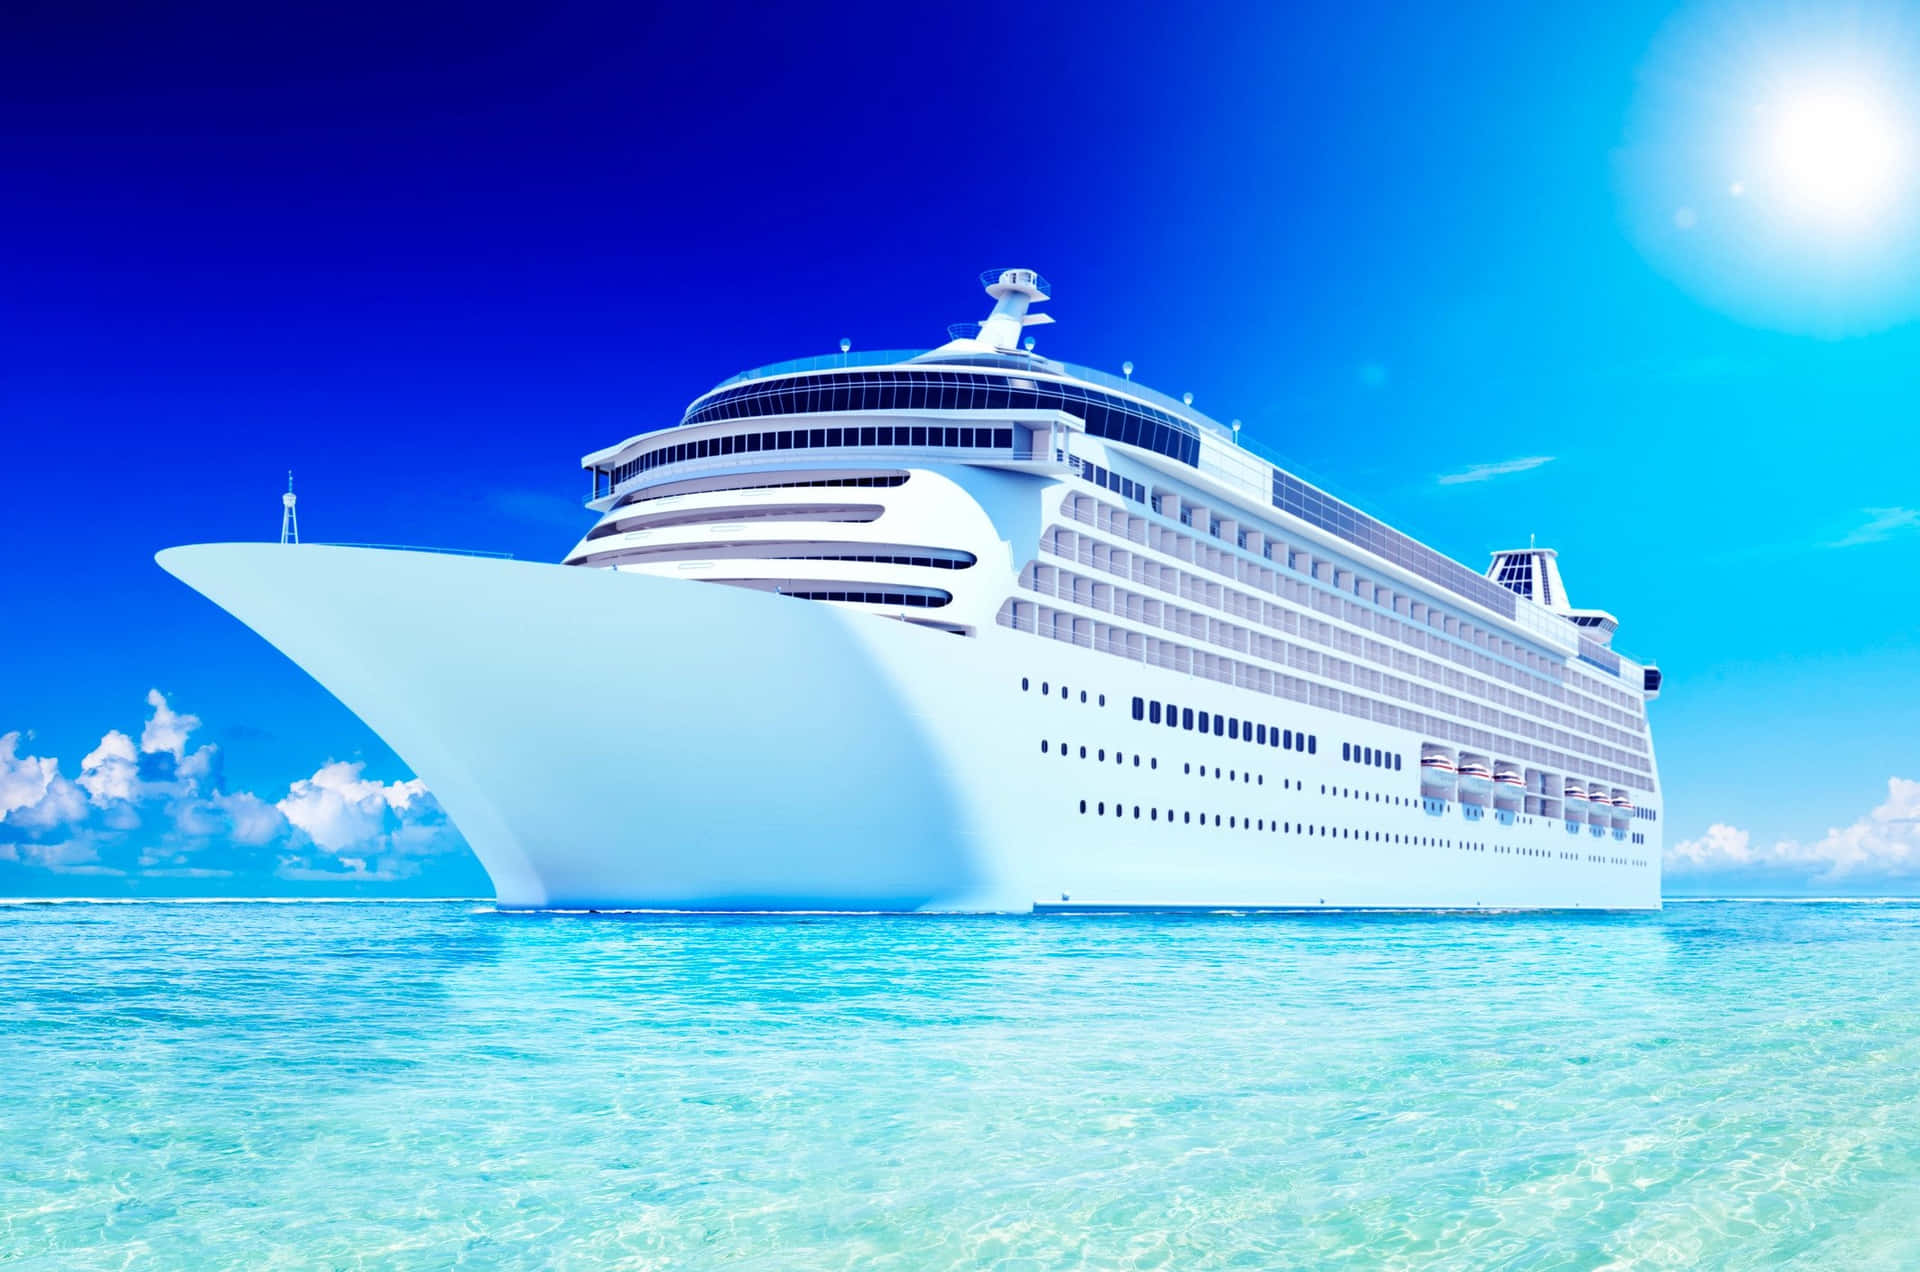 Surrounded by sapphire blue waters, a luxurious cruise ship glides against a bright sky